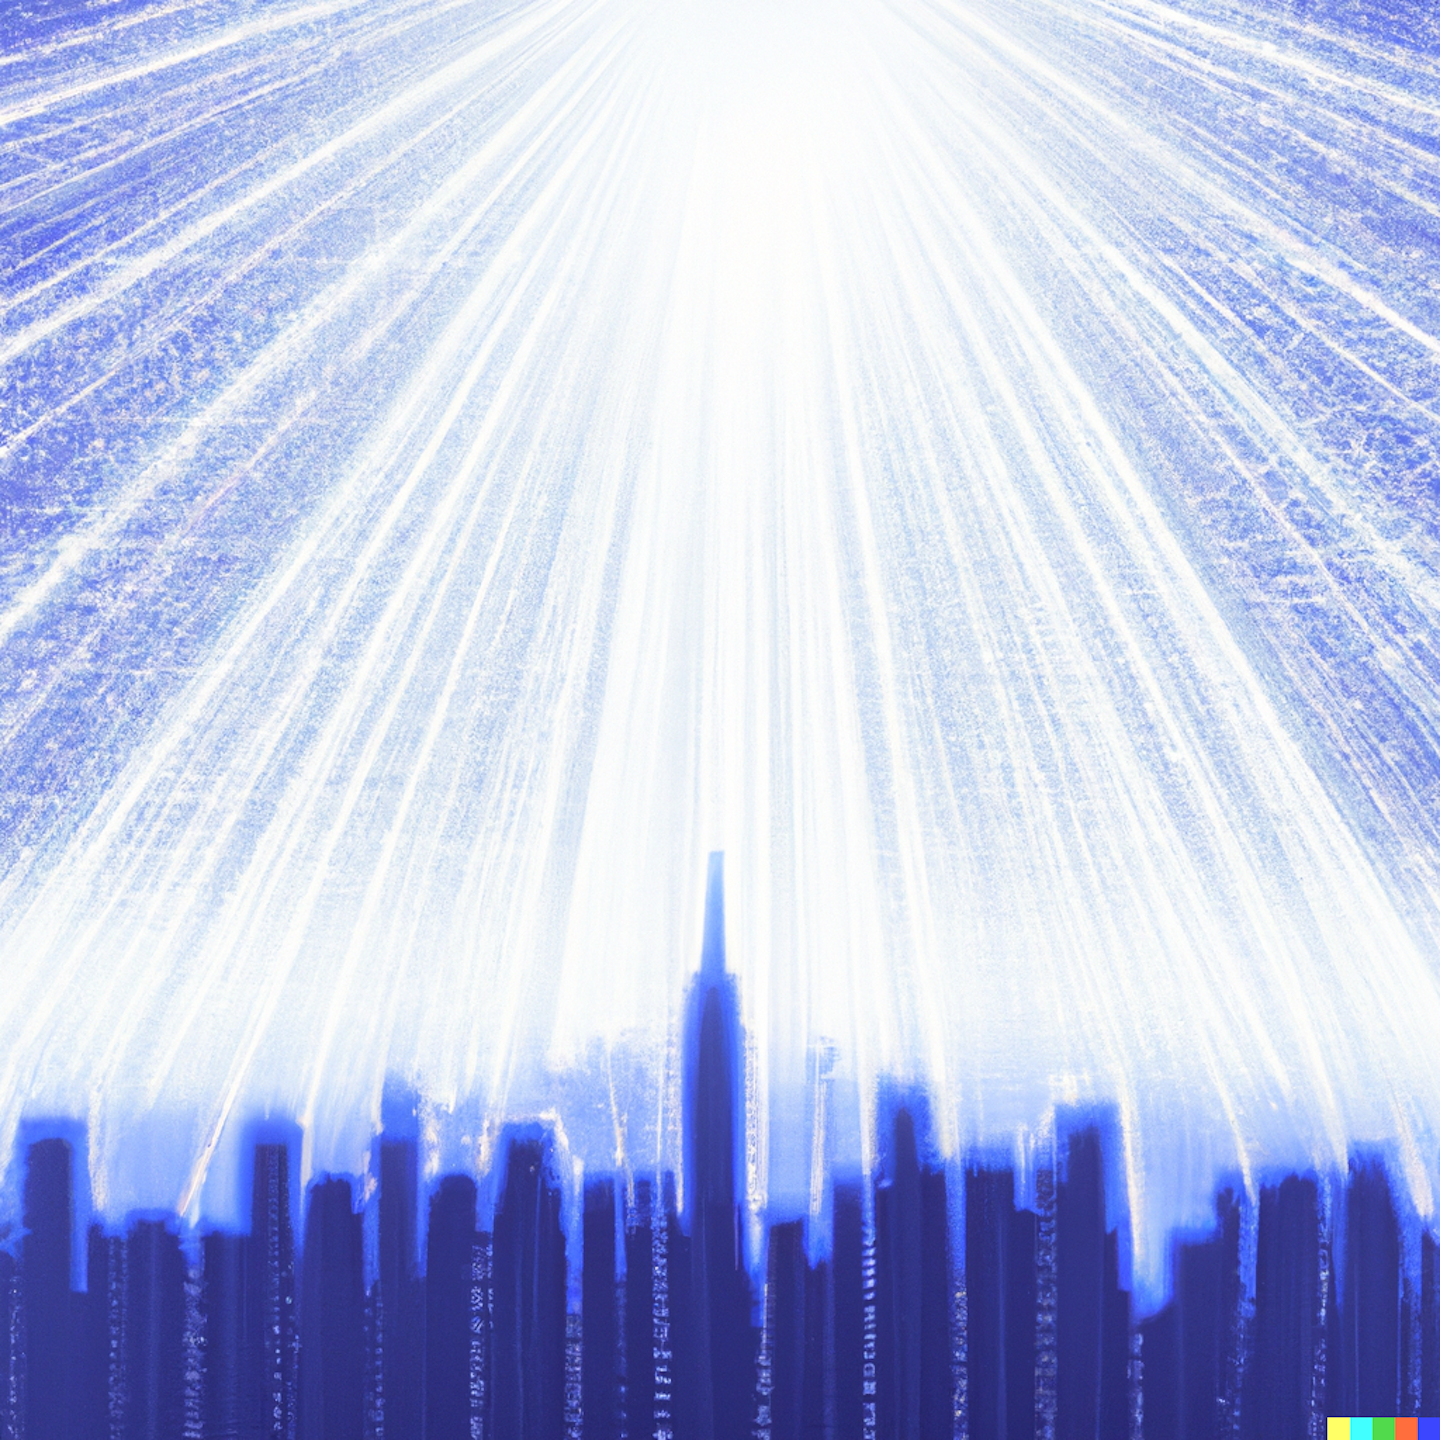 DALLE_2022-08-12_16.50.29_-_New_York_City_on_the_horizon_with_heavenly_light_behind_it_in_the_style_of_a_blueprint.png